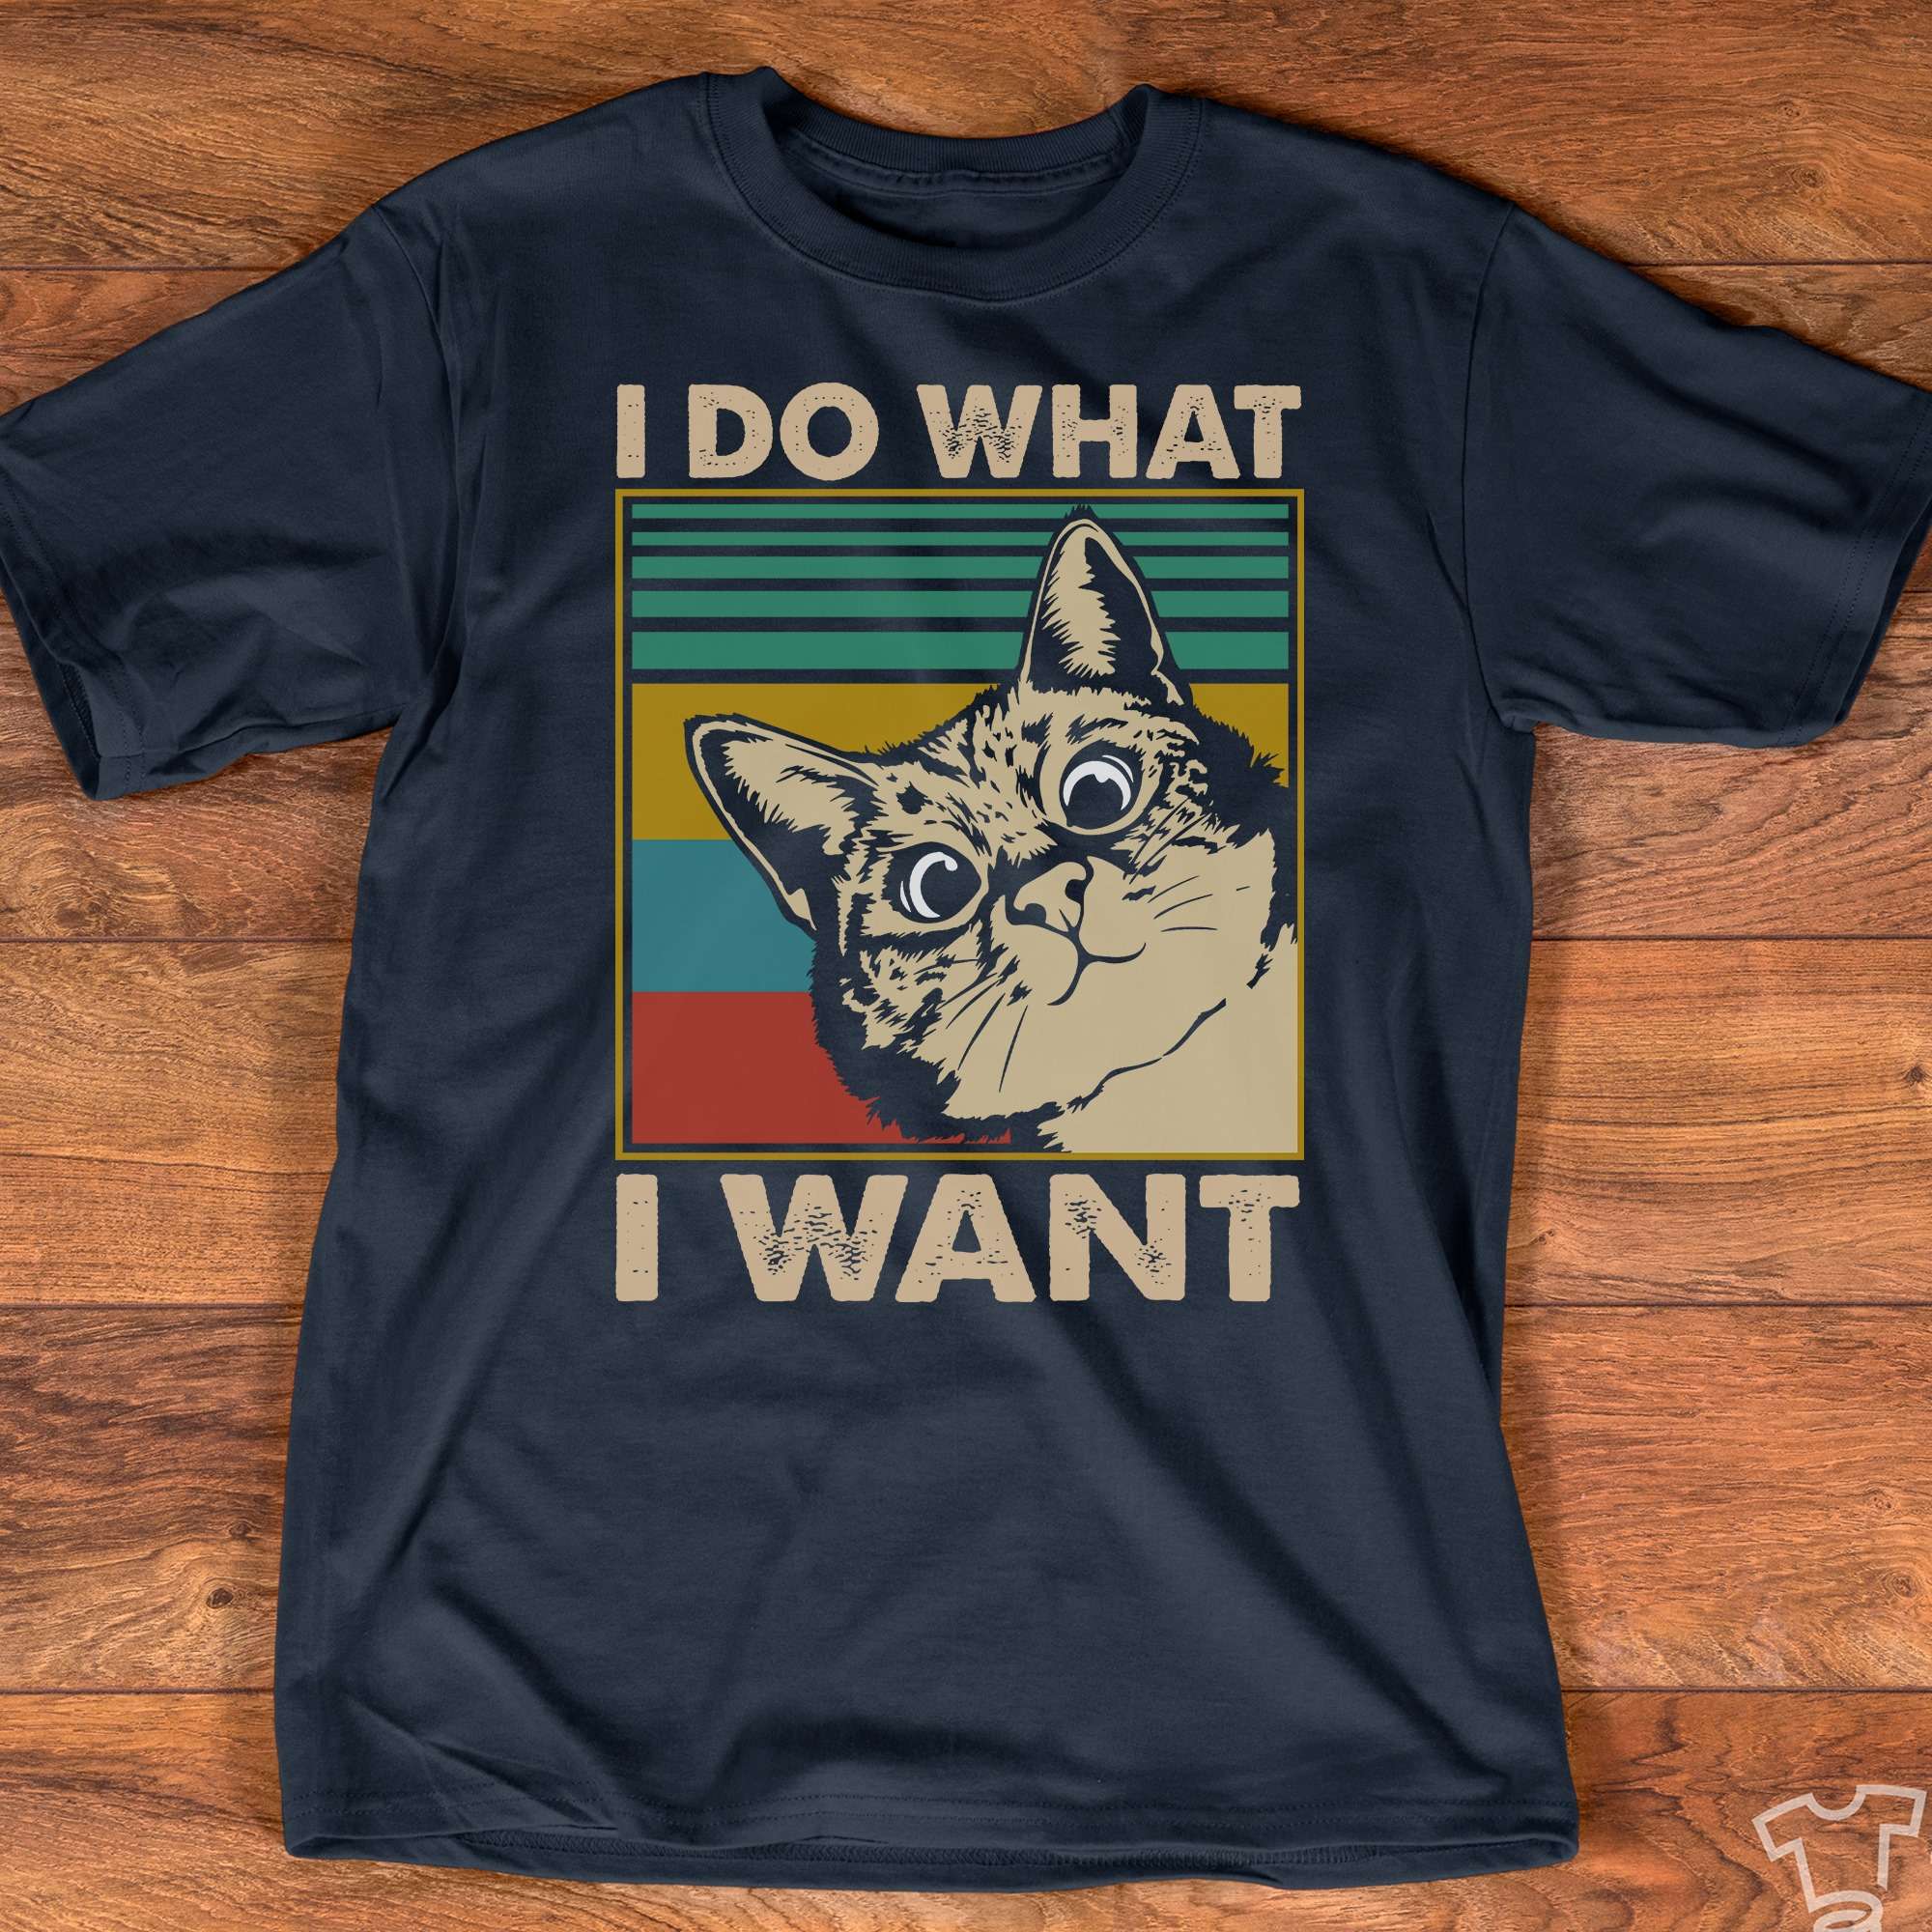 I do what I want - Freedom lifestyle, gift for cat person